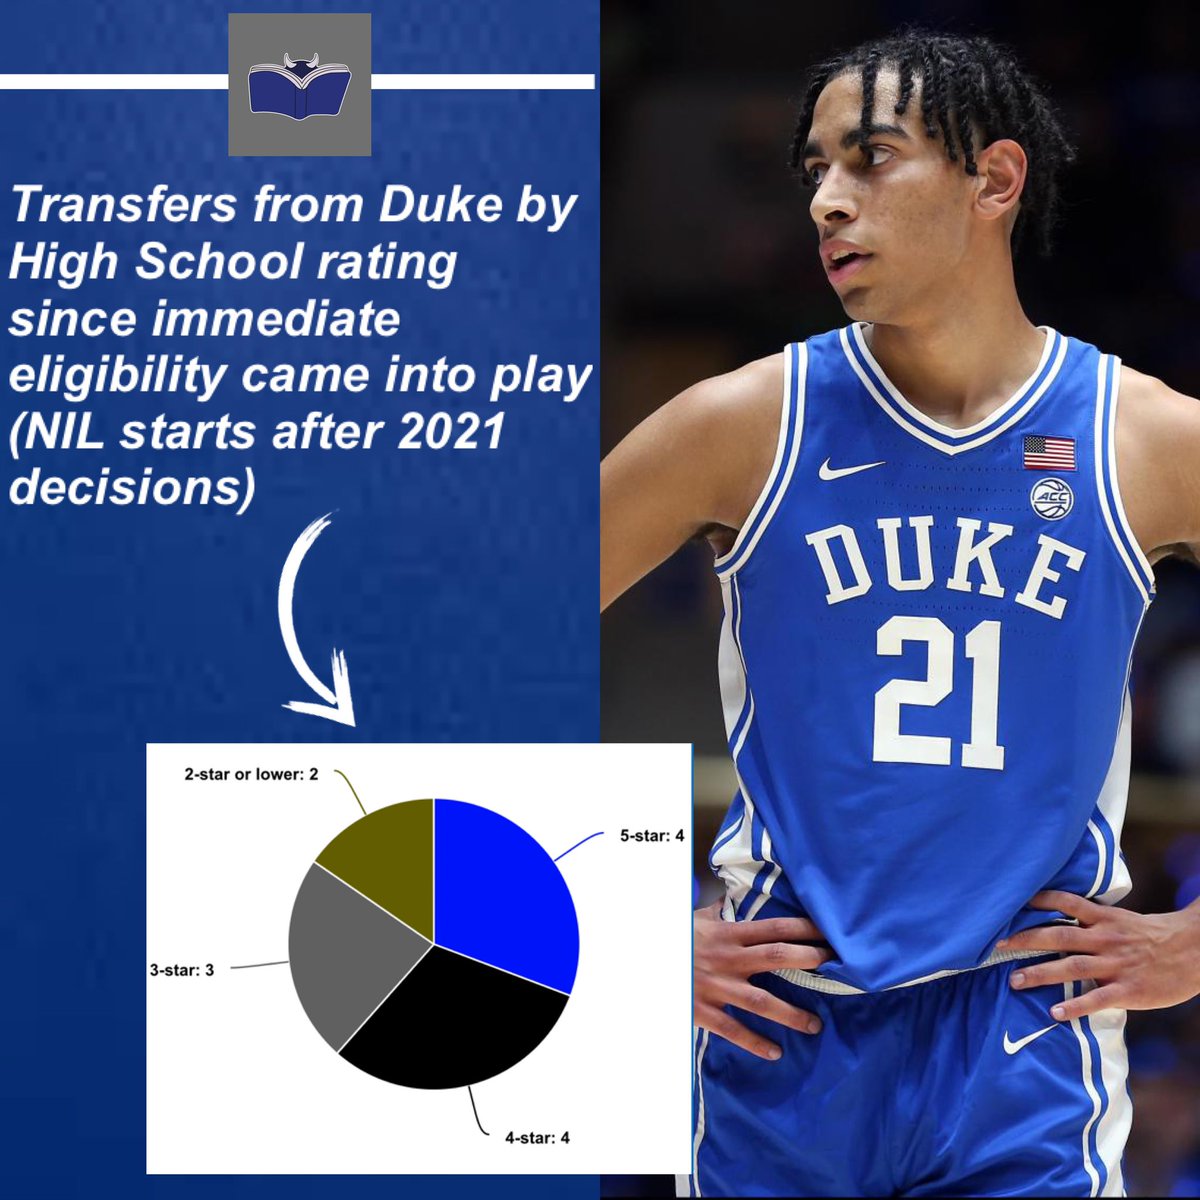 Some more graphs to look at the number of players entering the transfer portal from Duke since 2021 How many are freshman vs graduating players? How many are 5-stars?